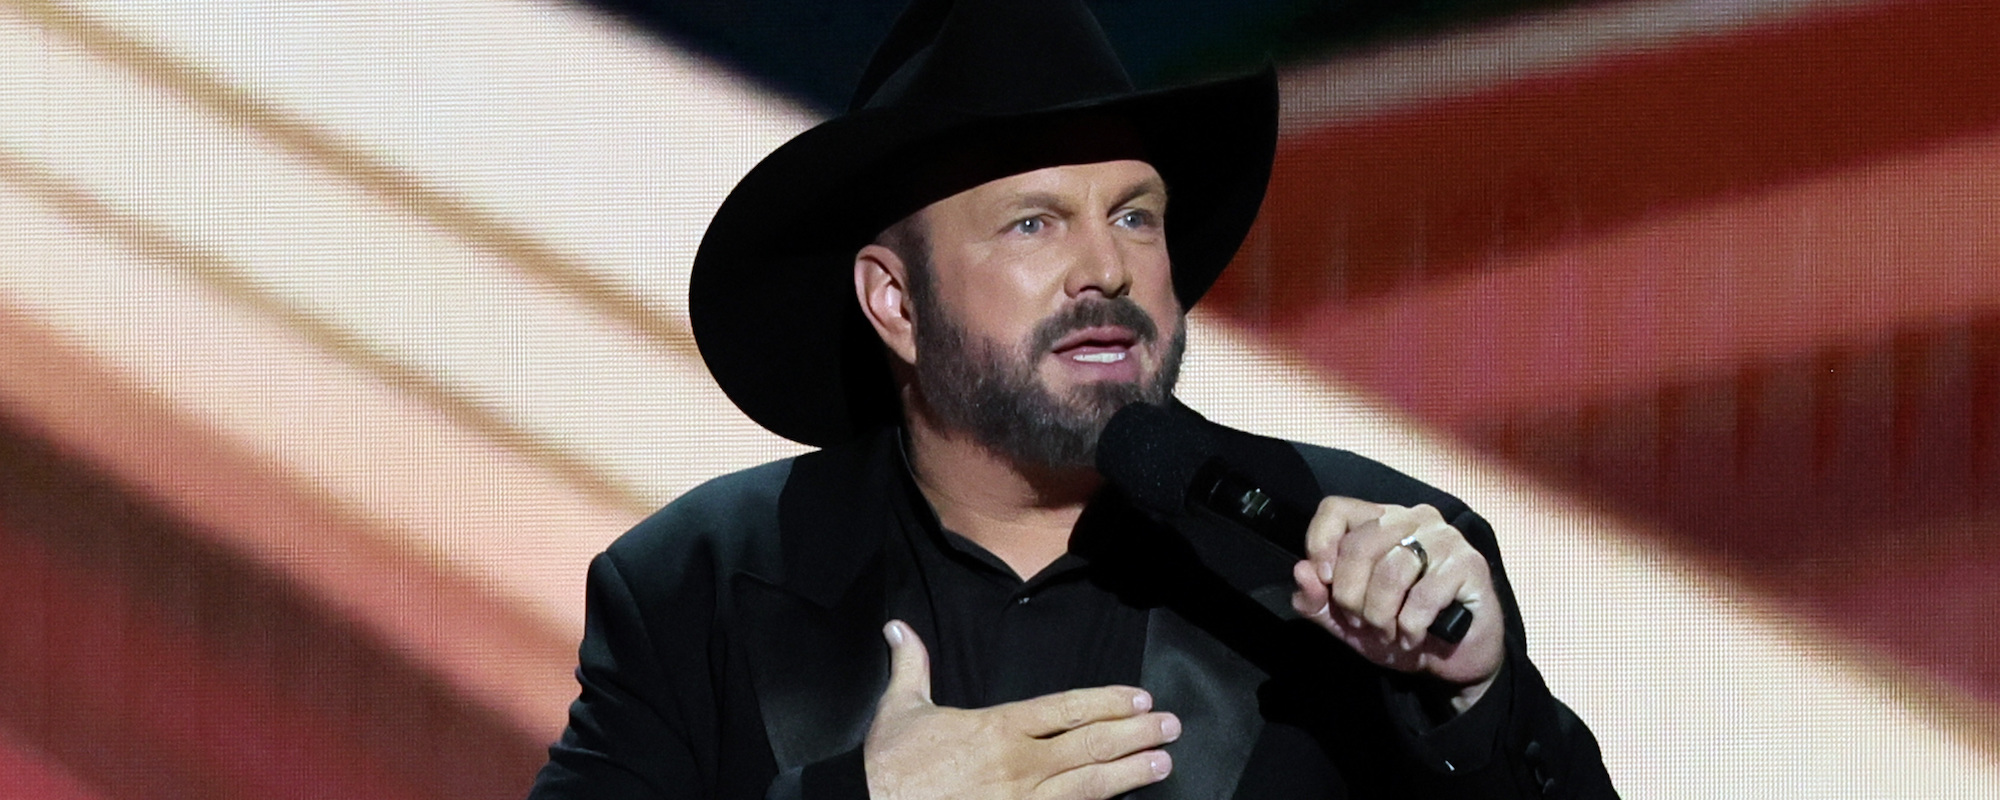 Garth Brooks Reflects on the Death of Rosalynn Carter: “A Light Has Gone Out”